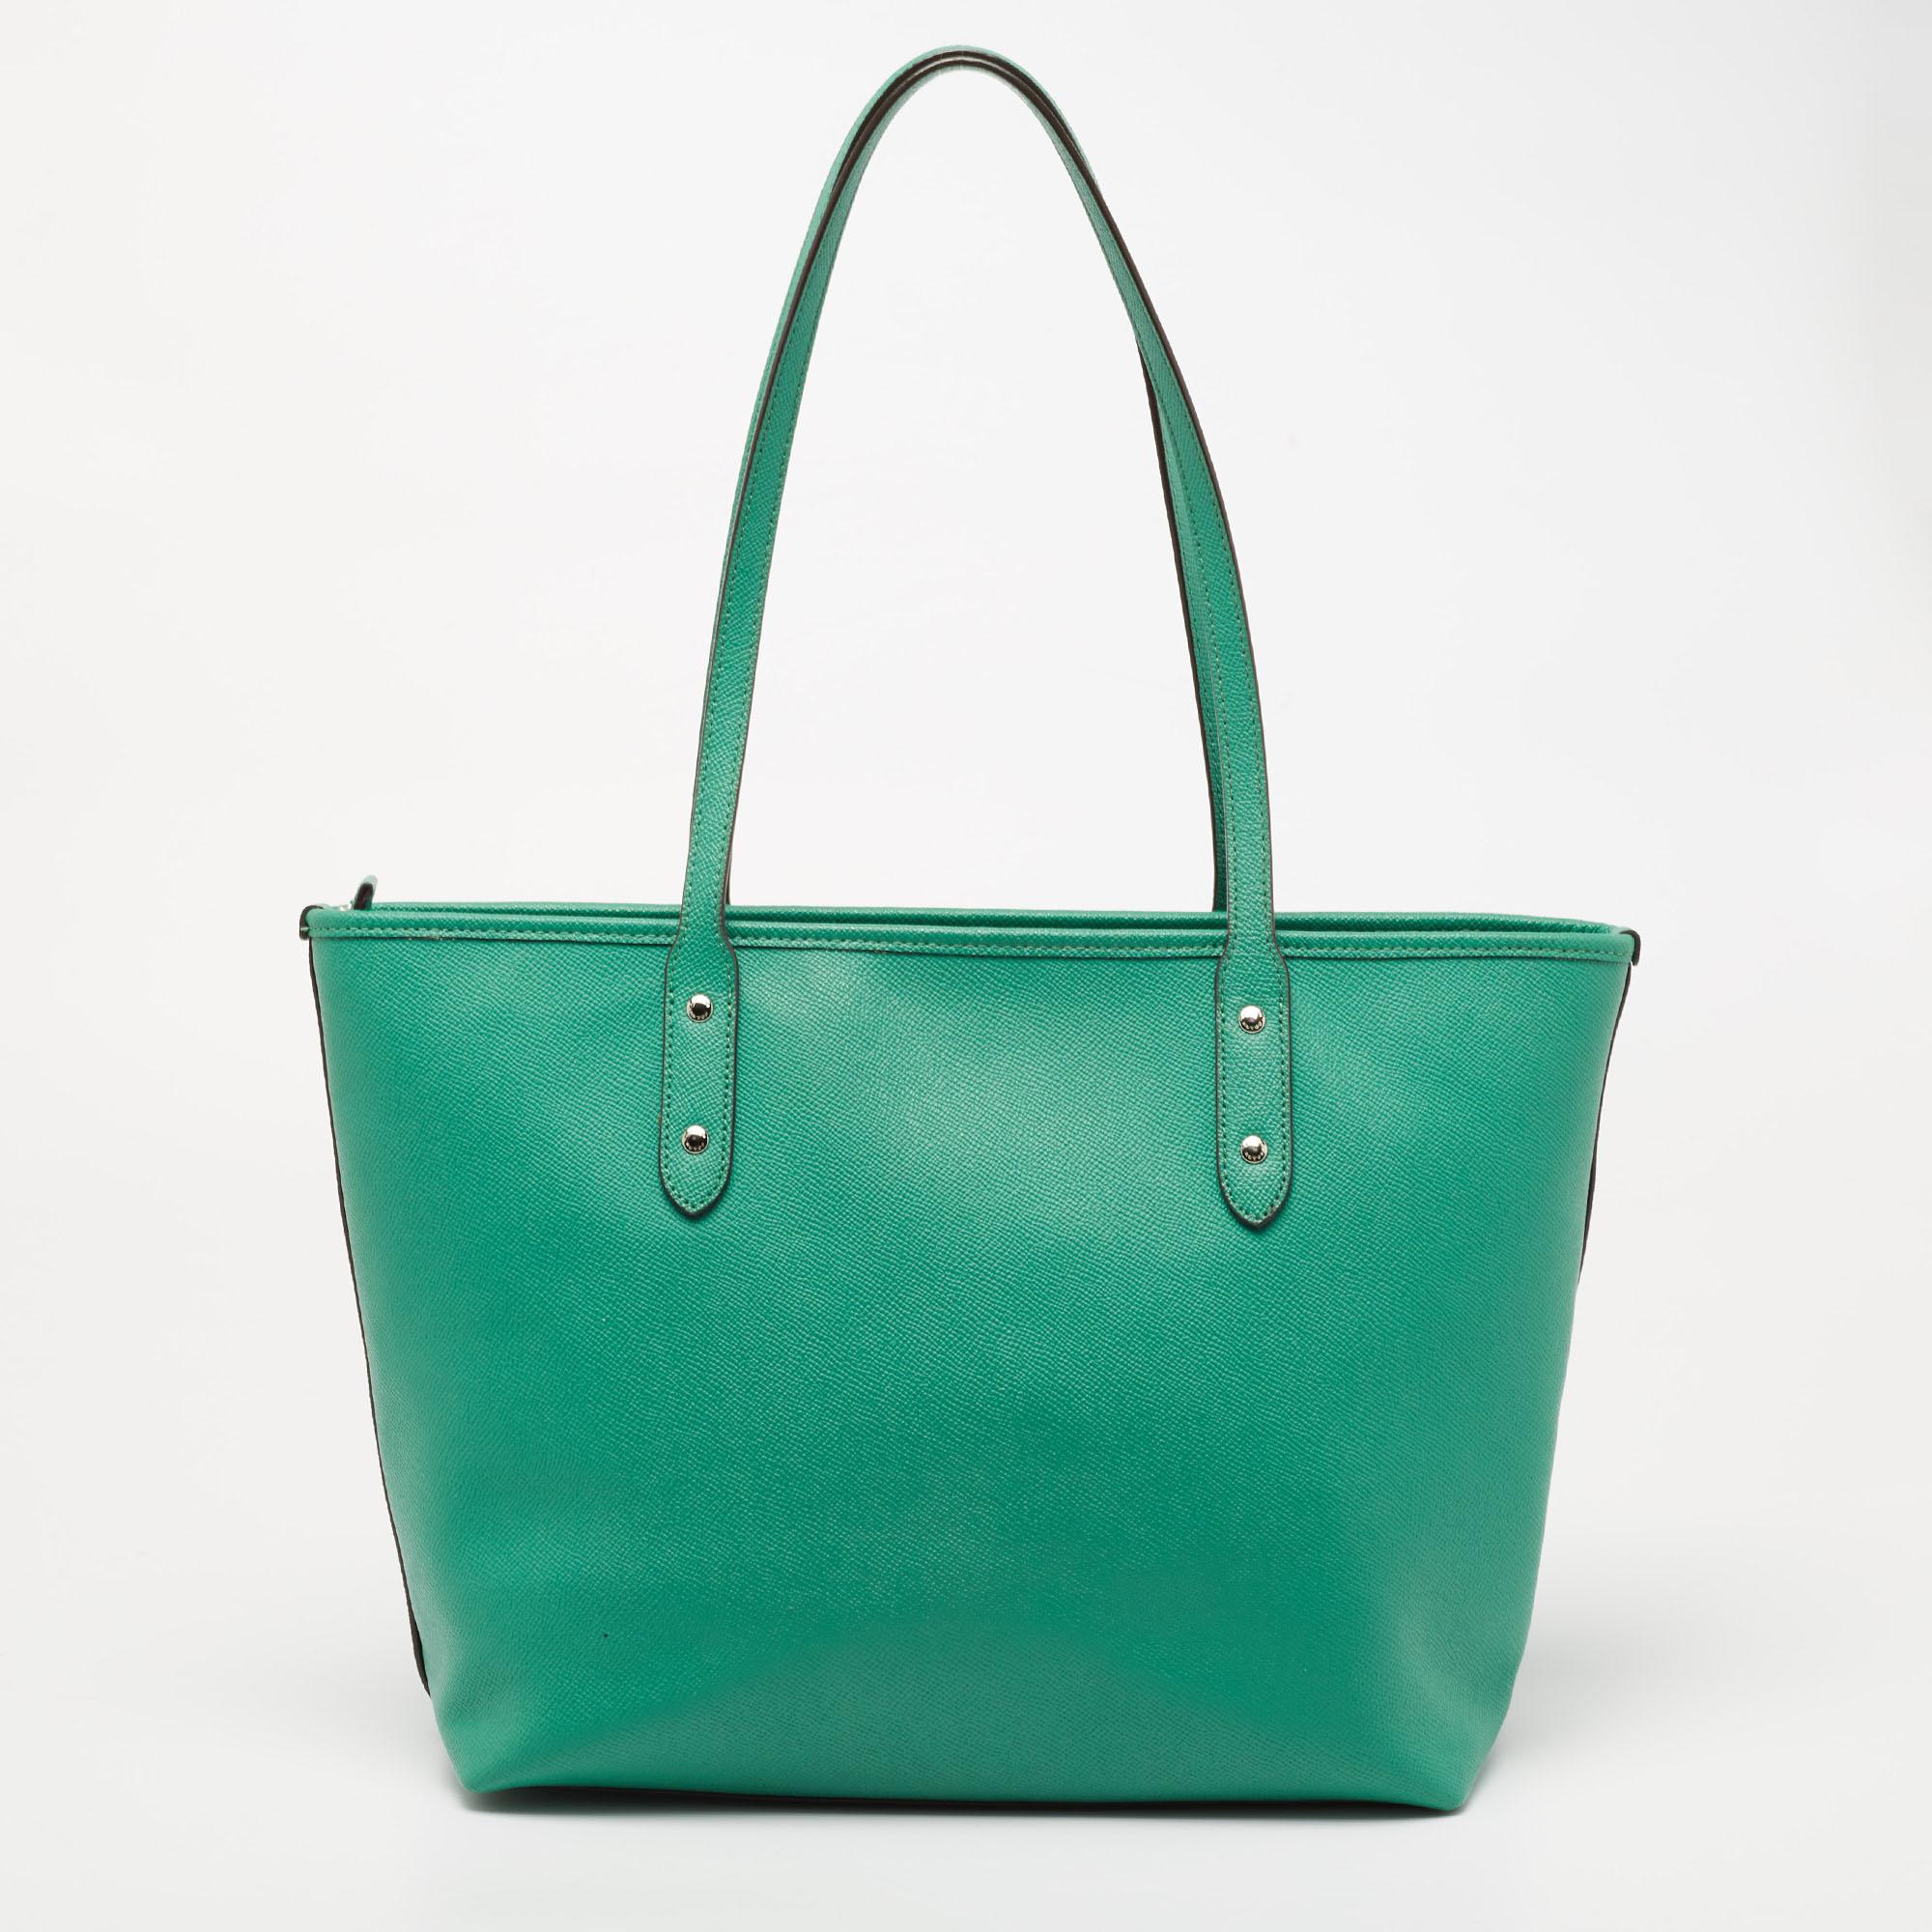 This City Zip tote from the House of Coach is great for everyday use. It is made from green leather, which is embellished with silver-tone hardware. It showcases dual handles and a fabric-lined interior. This tote will make you look classy and